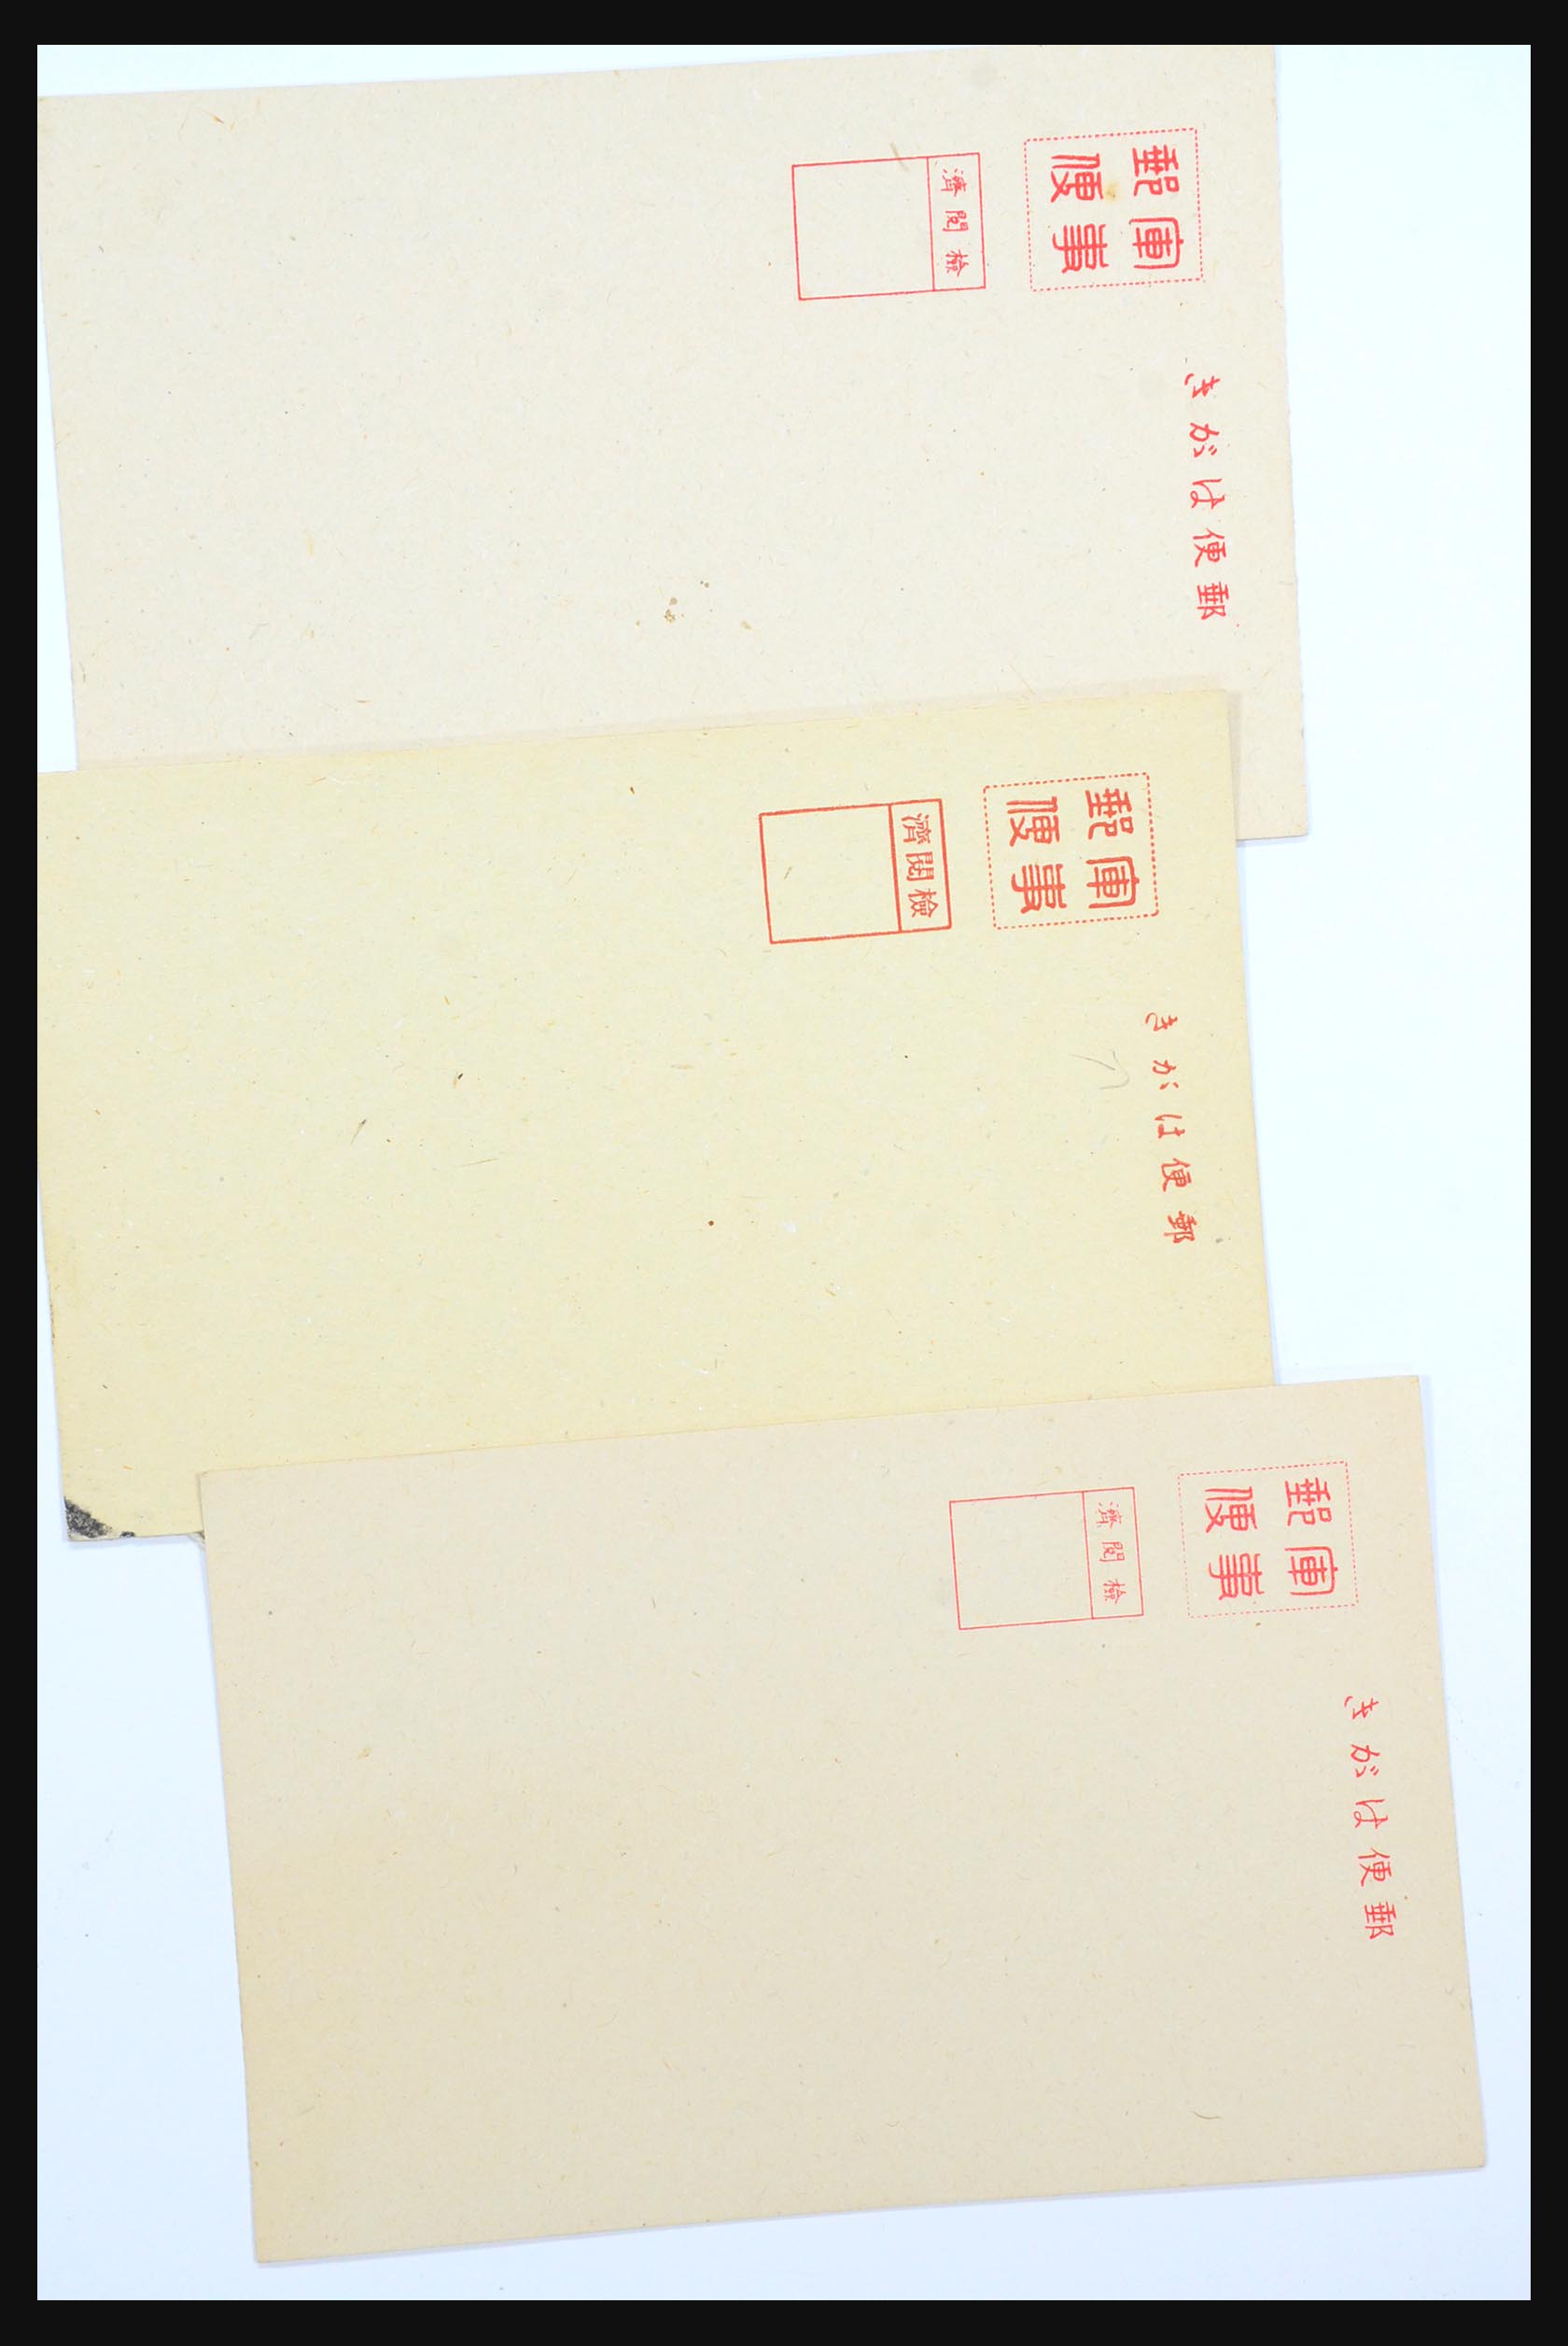 31362 057 - 31362 Netherlands Indies Japanese occupation covers 1942-1945.